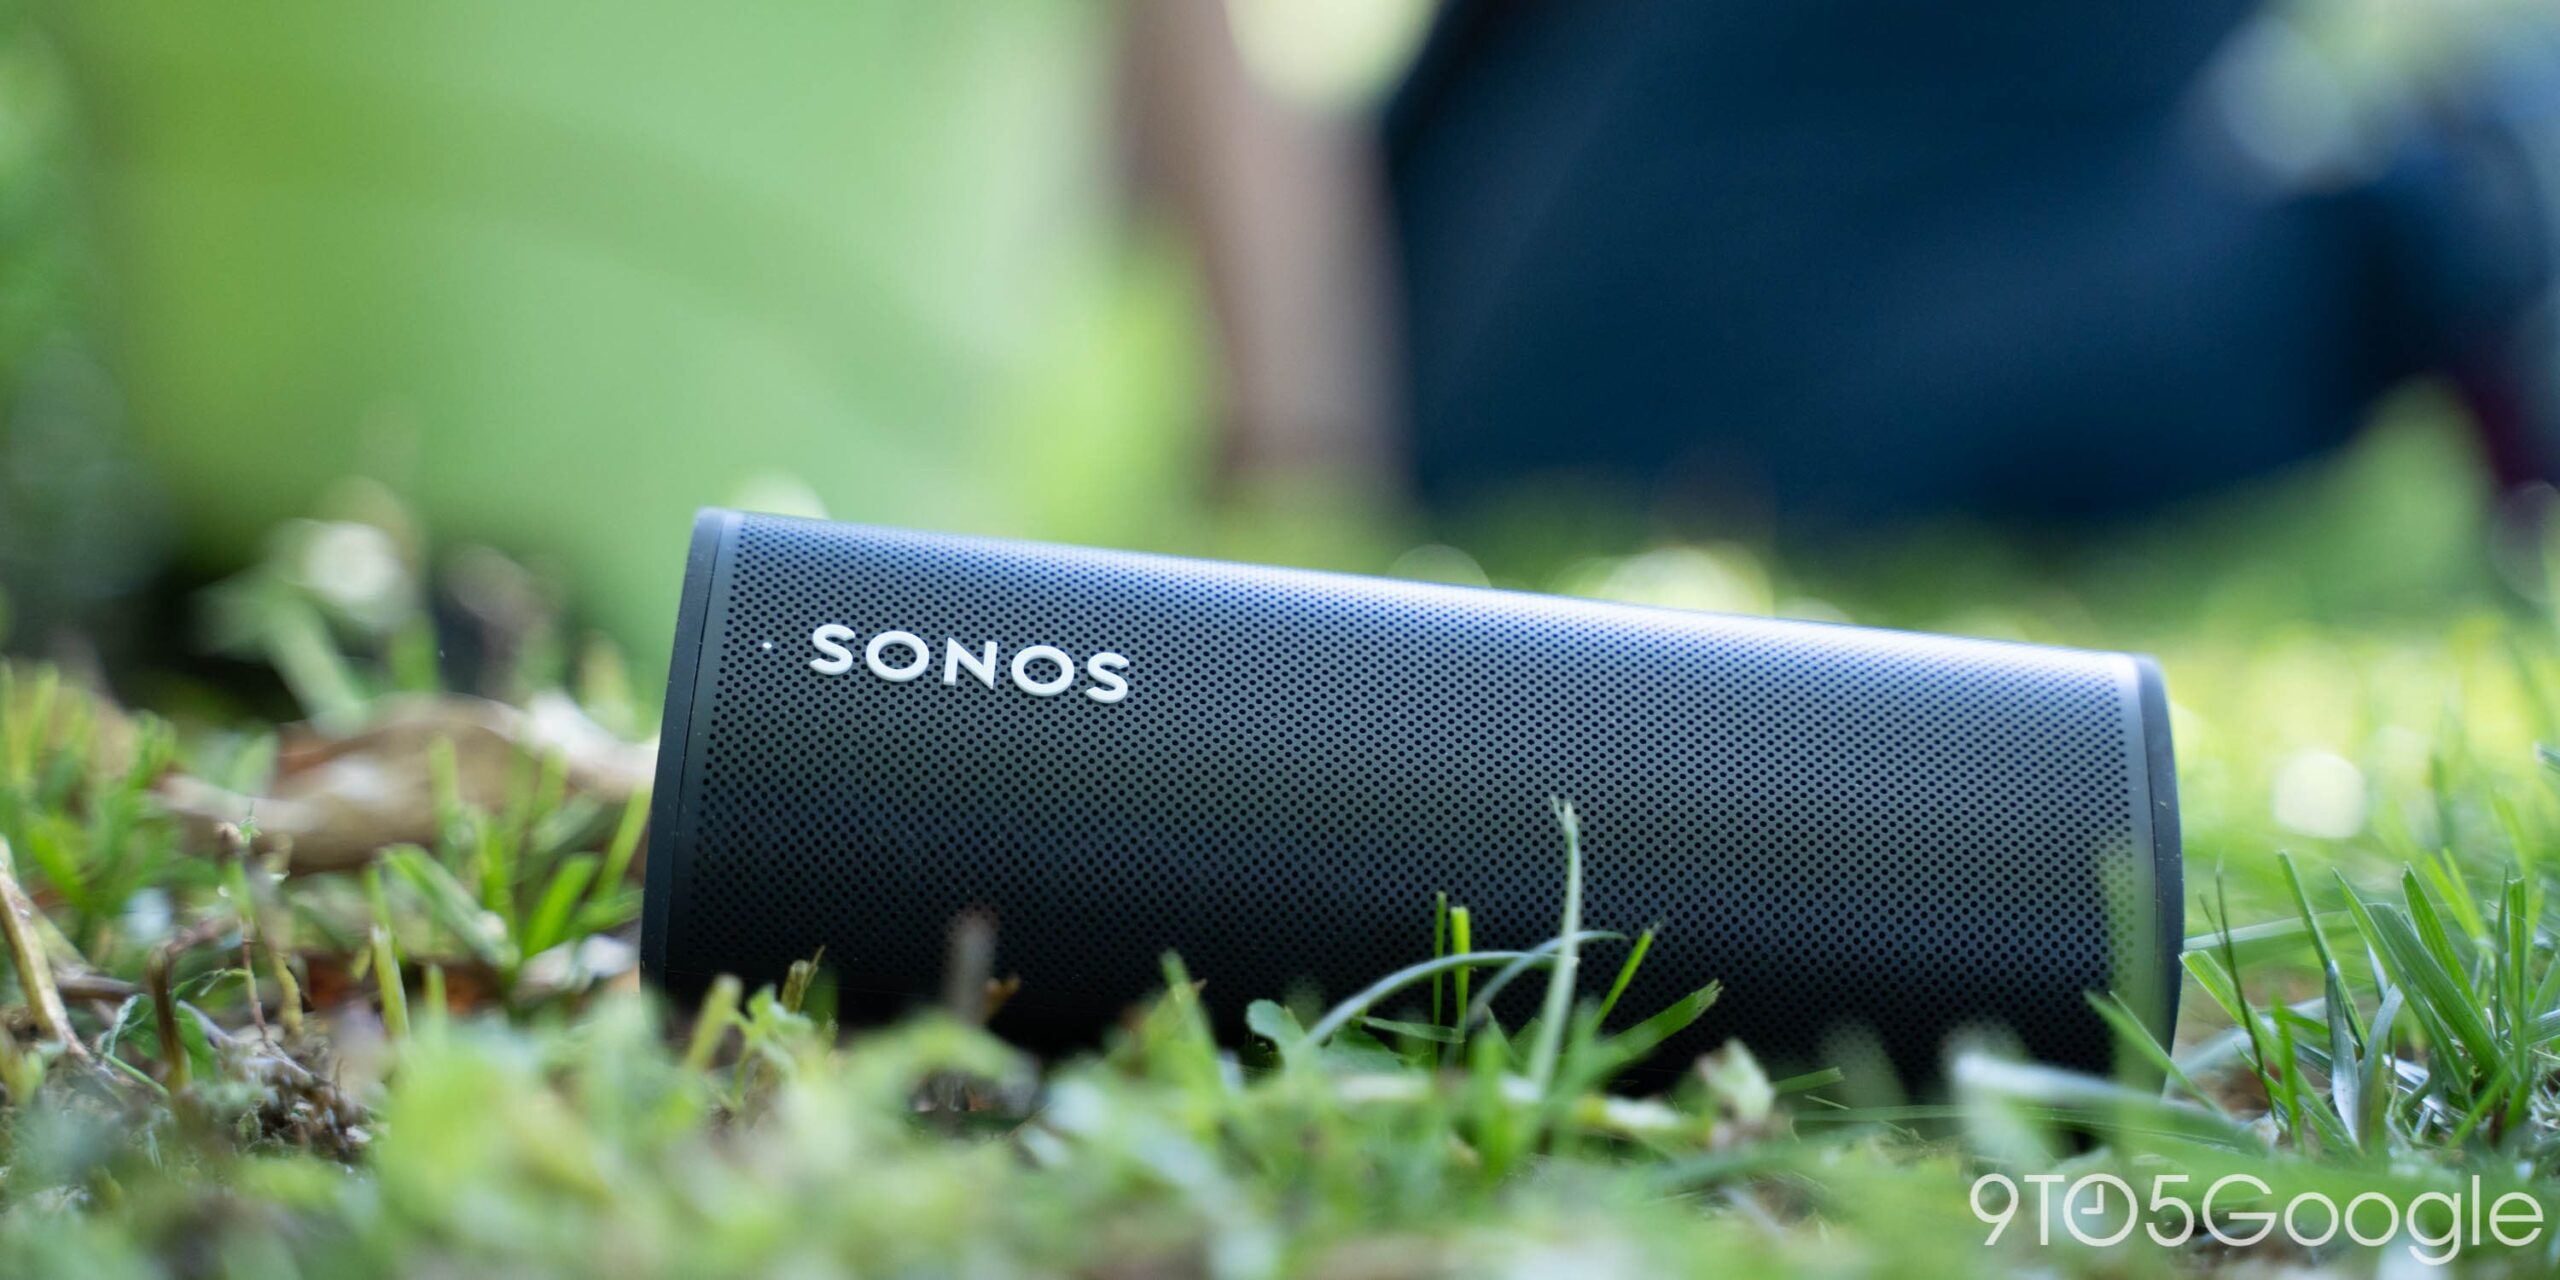 Google is blocking Sonos from offering more than one voice assistant at once